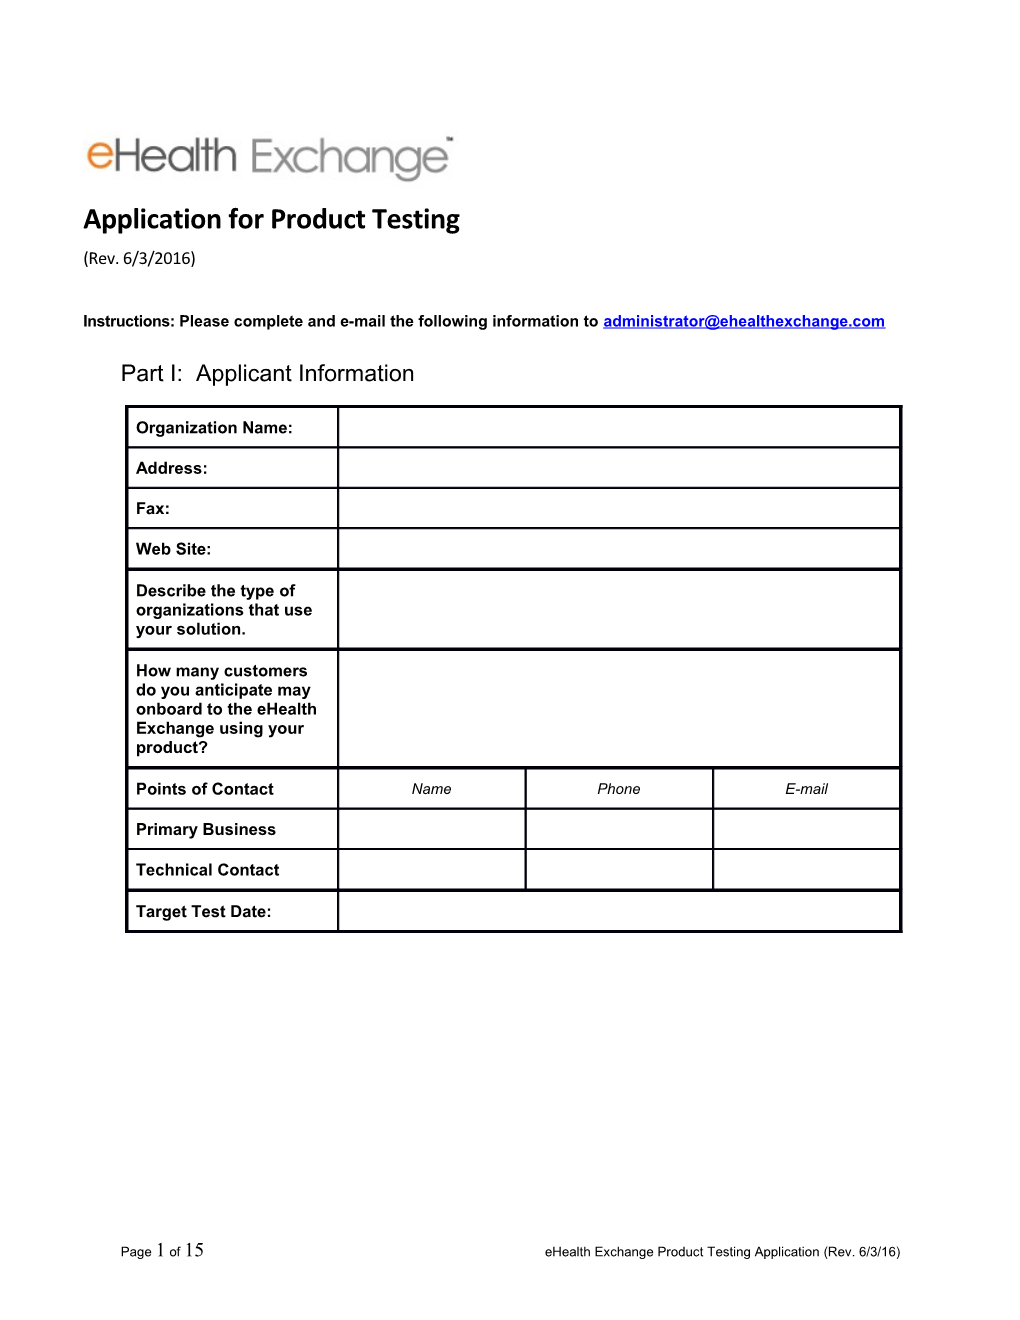 Application for Product Testing